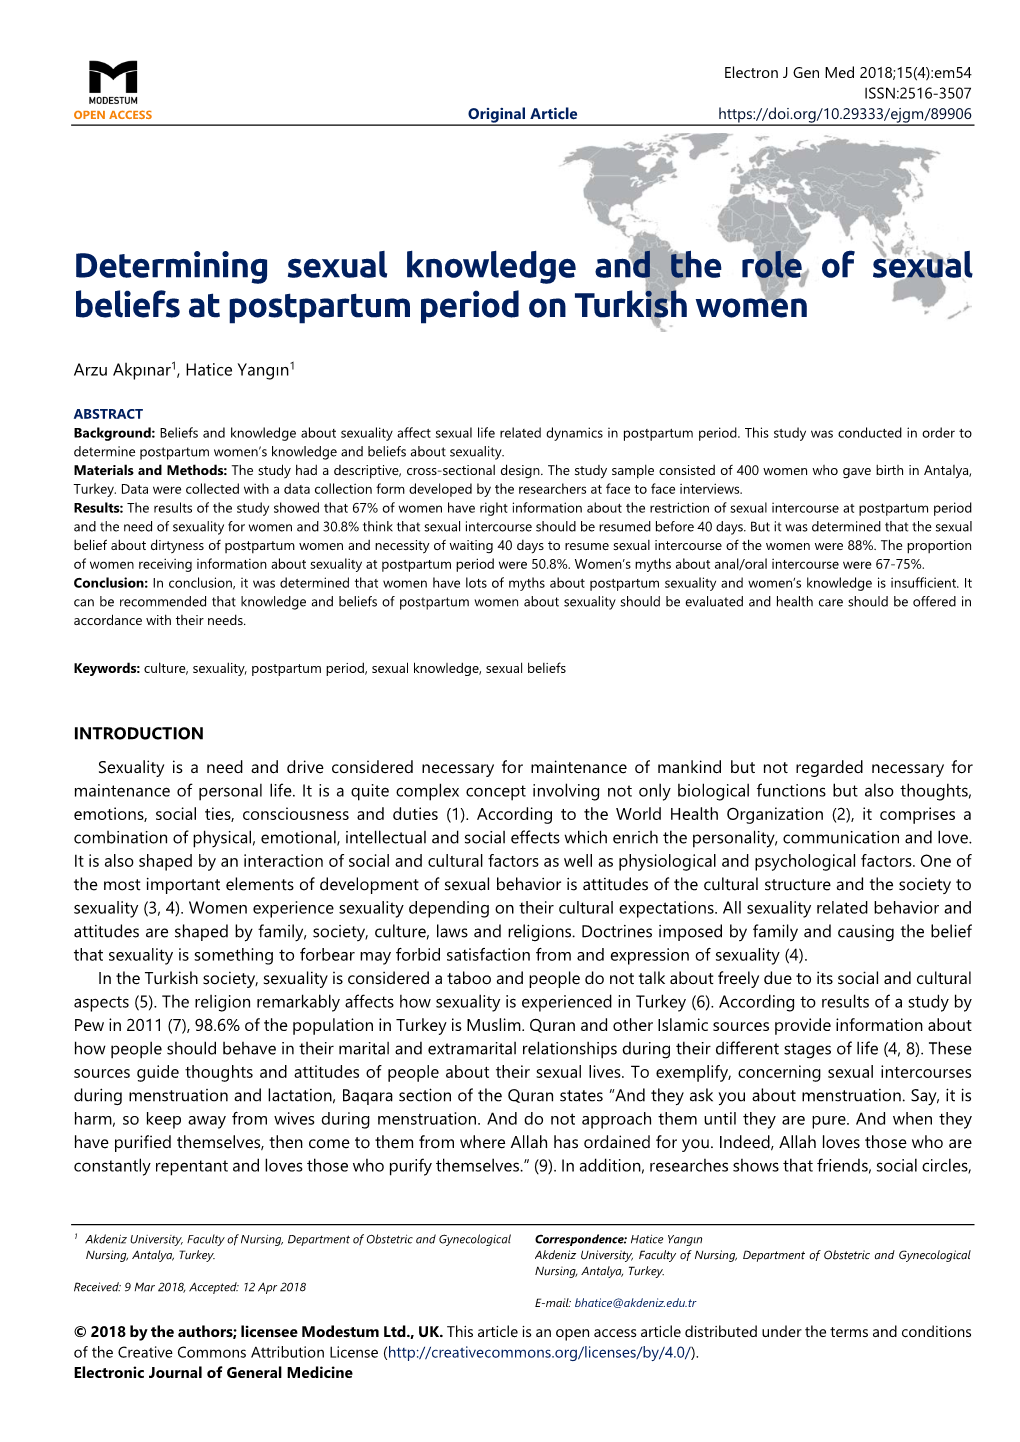 Determining Sexual Knowledge and the Role of Sexual Beliefs at Postpartum Period on Turkish Women